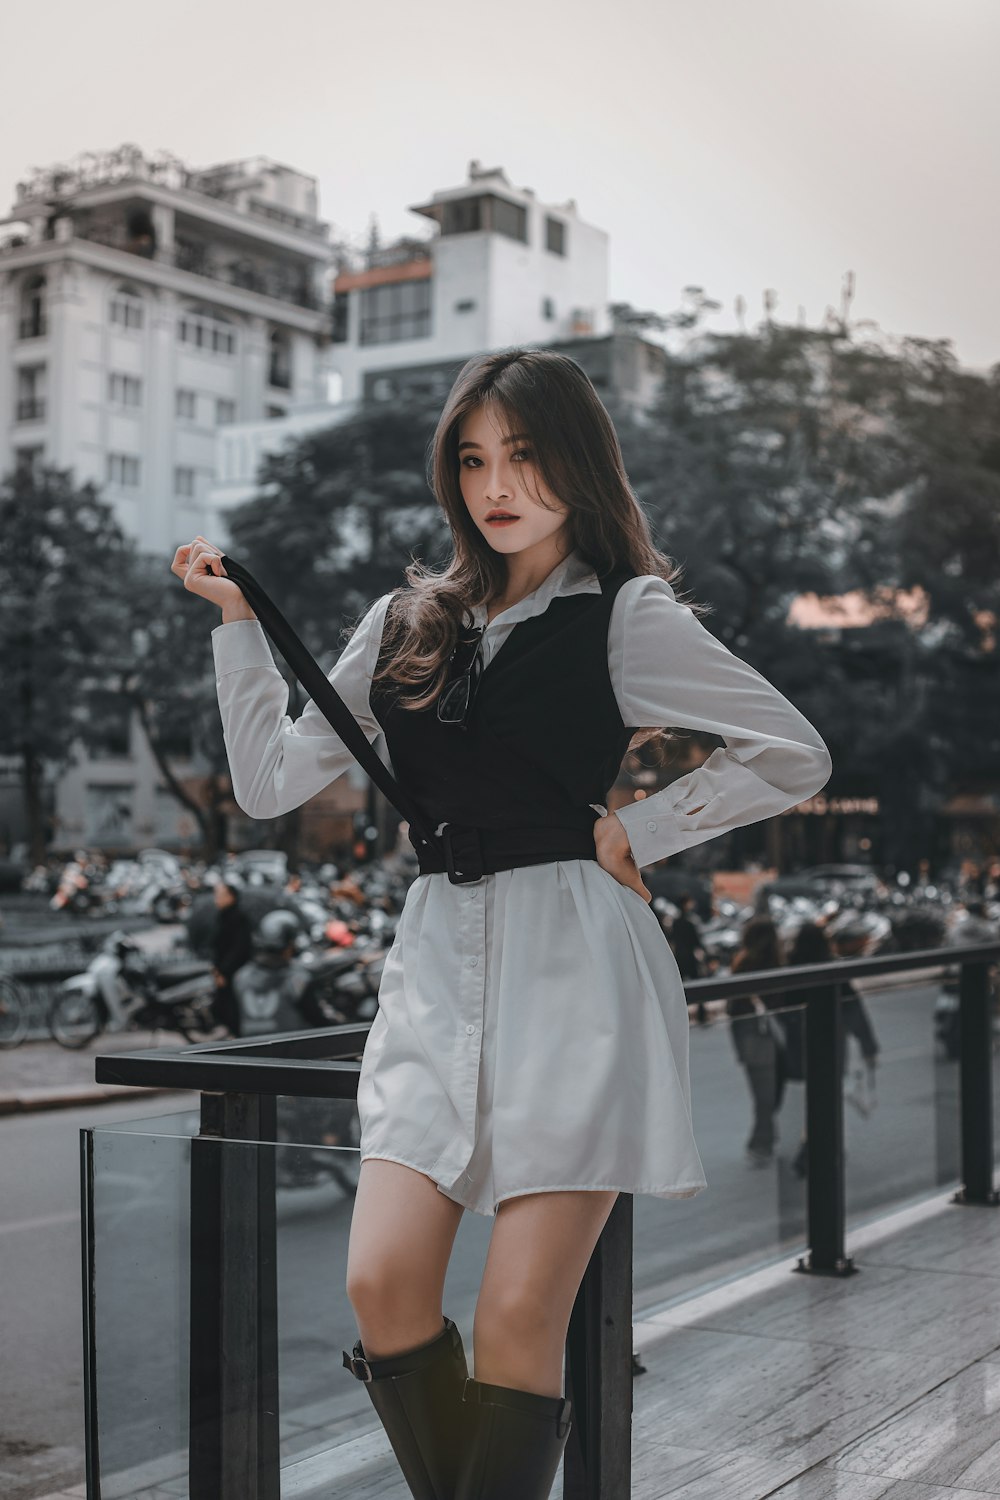 Woman in black long sleeve shirt and white skirt standing on the street  during daytime photo – Free Grey Image on Unsplash